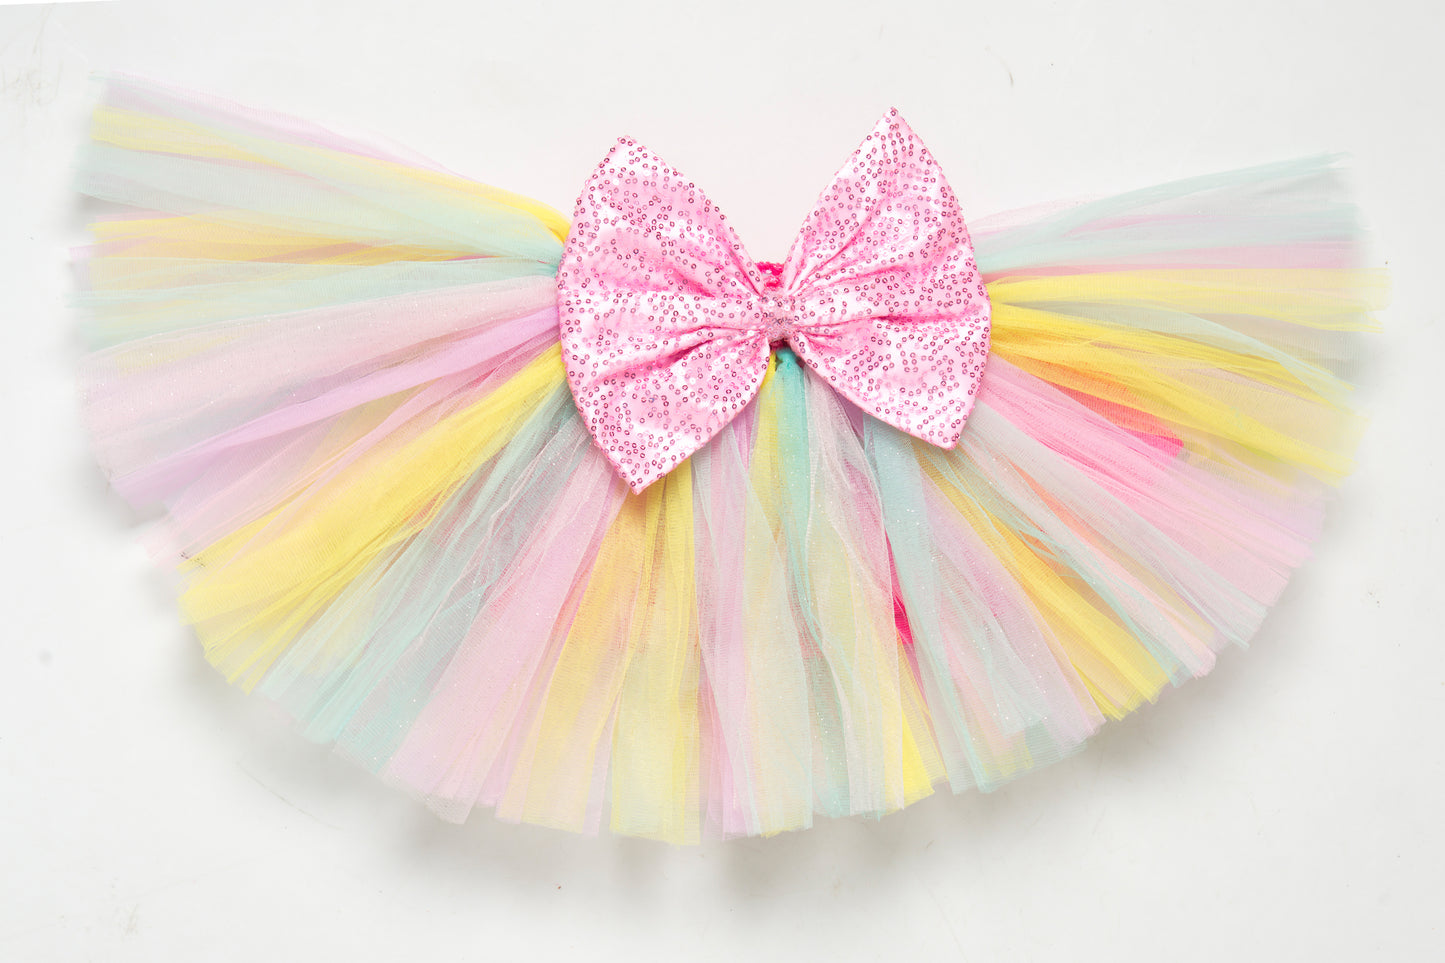 Pastel Tutu Skirt with Sequins Bow